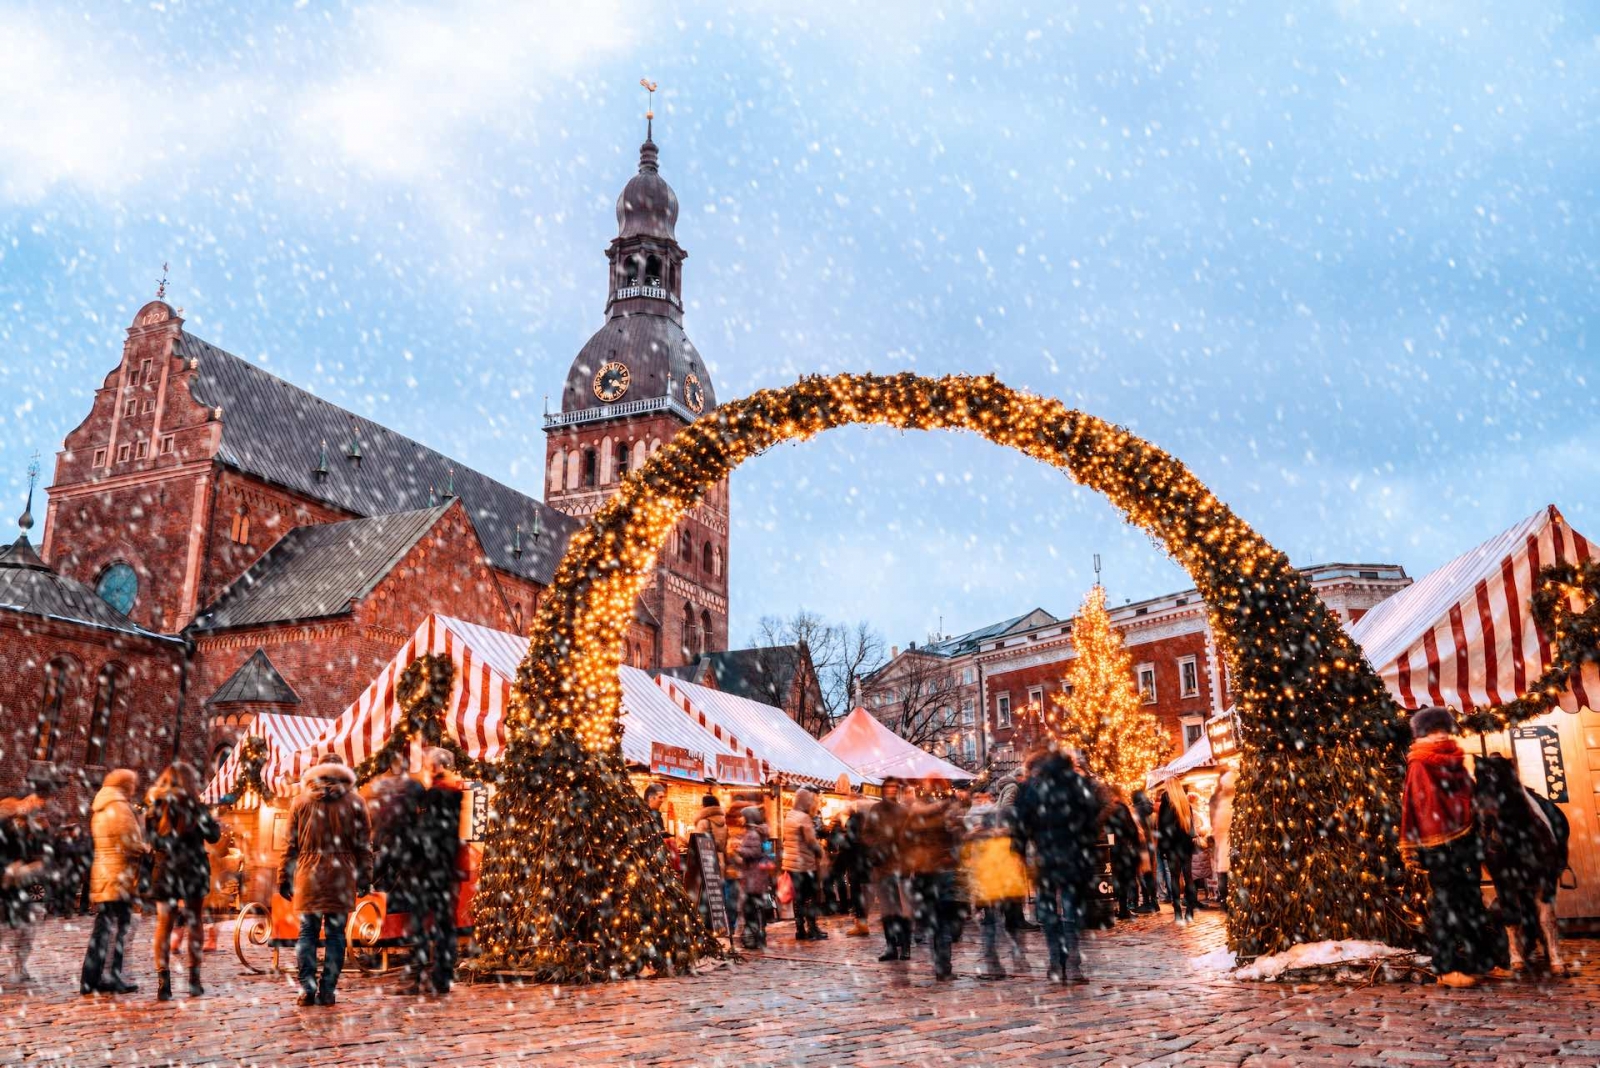 Christmas market and the main Christmas tree located at the Dome square in old Riga, Latvia